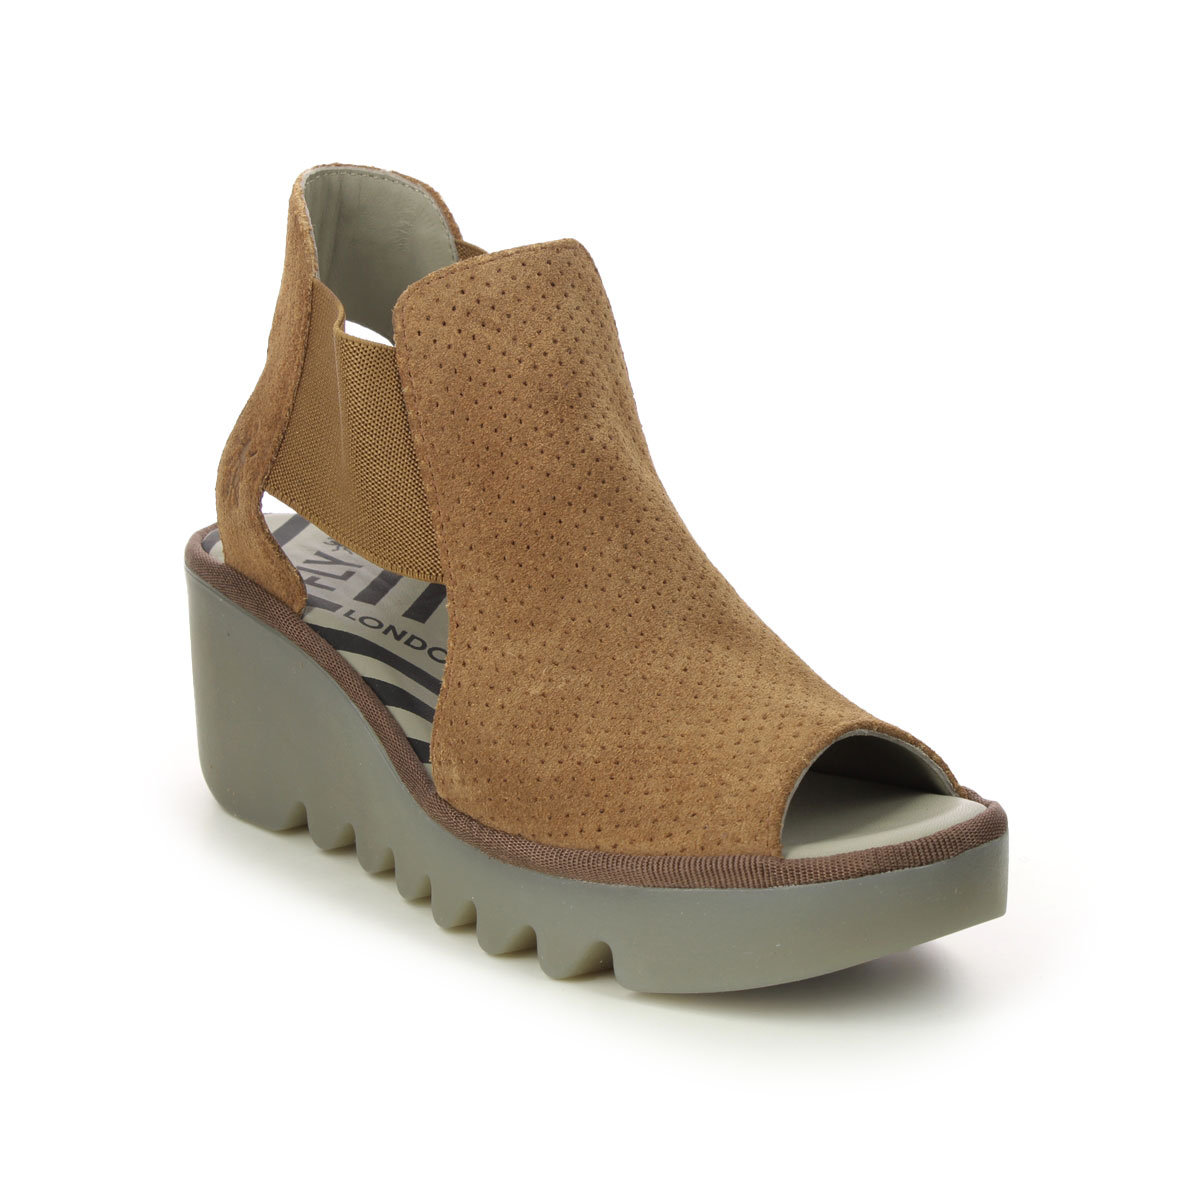 Fly London Biga  Blu Tan Suede Womens Wedge Sandals P501412-003 in a Plain Leather in Size 38